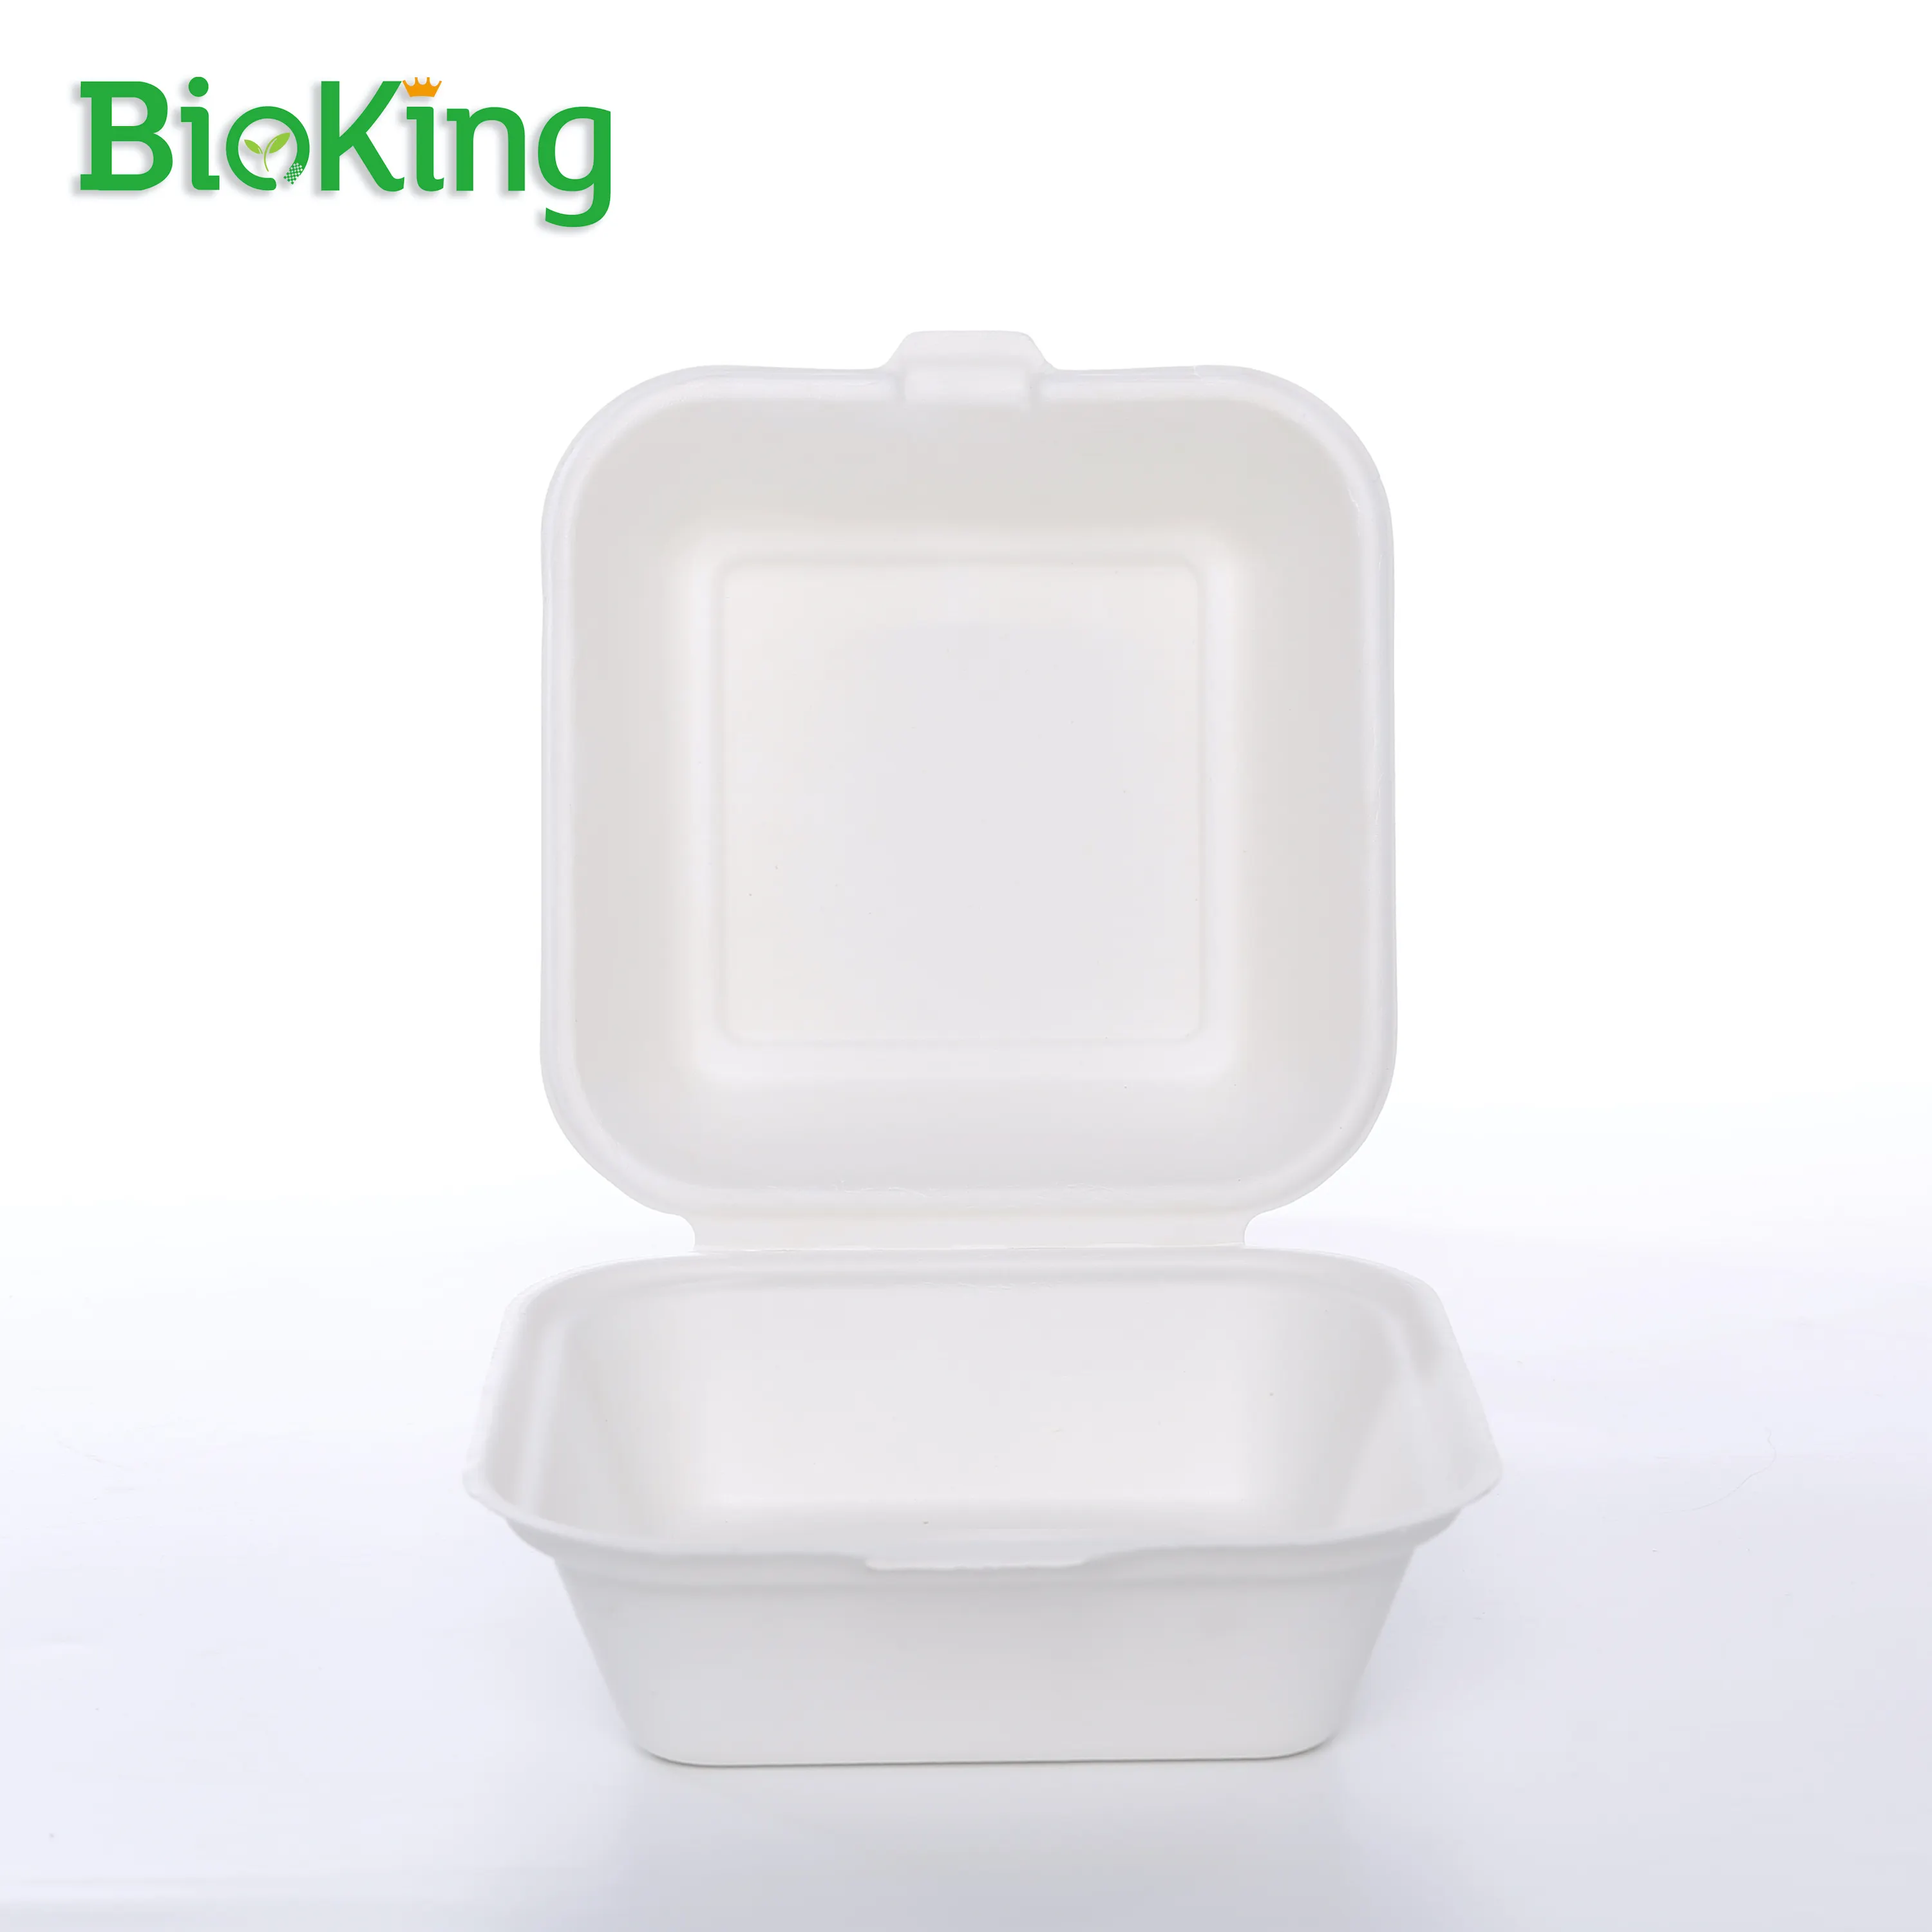 BioKing Good quality 6 inch clamshell Food Box take away fish and chips burger lunch paper box